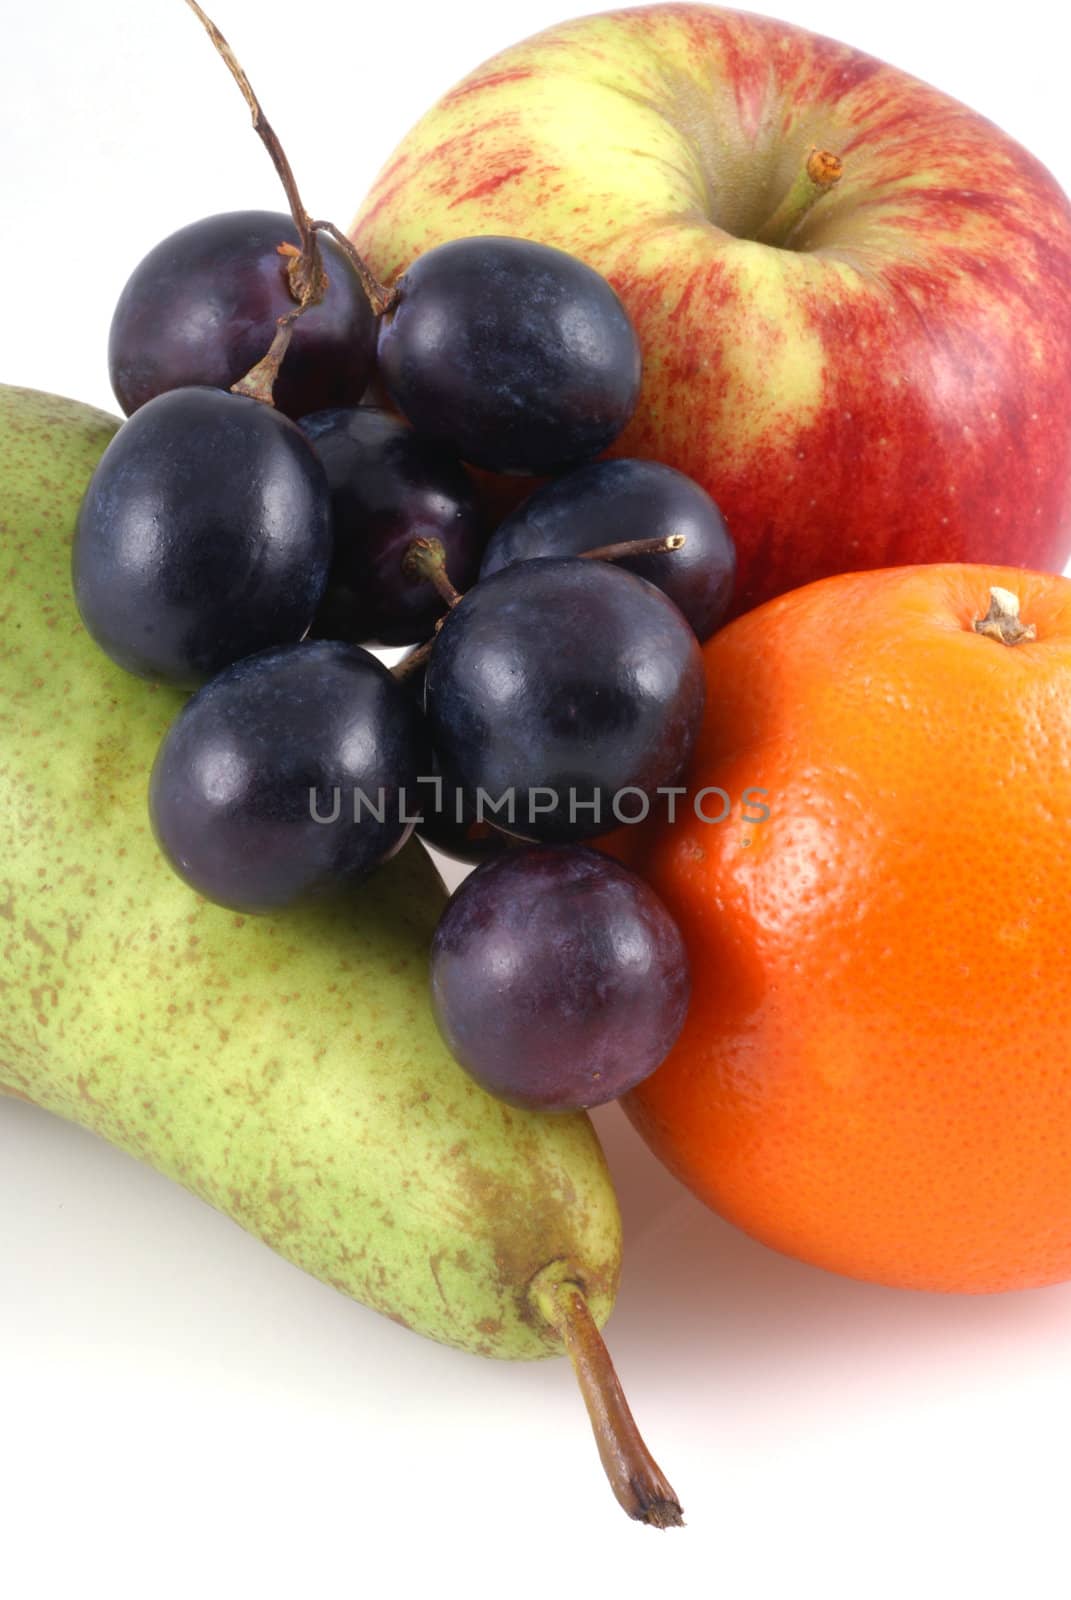 An apple, pear, orange and bunch of grapes on a white background. 